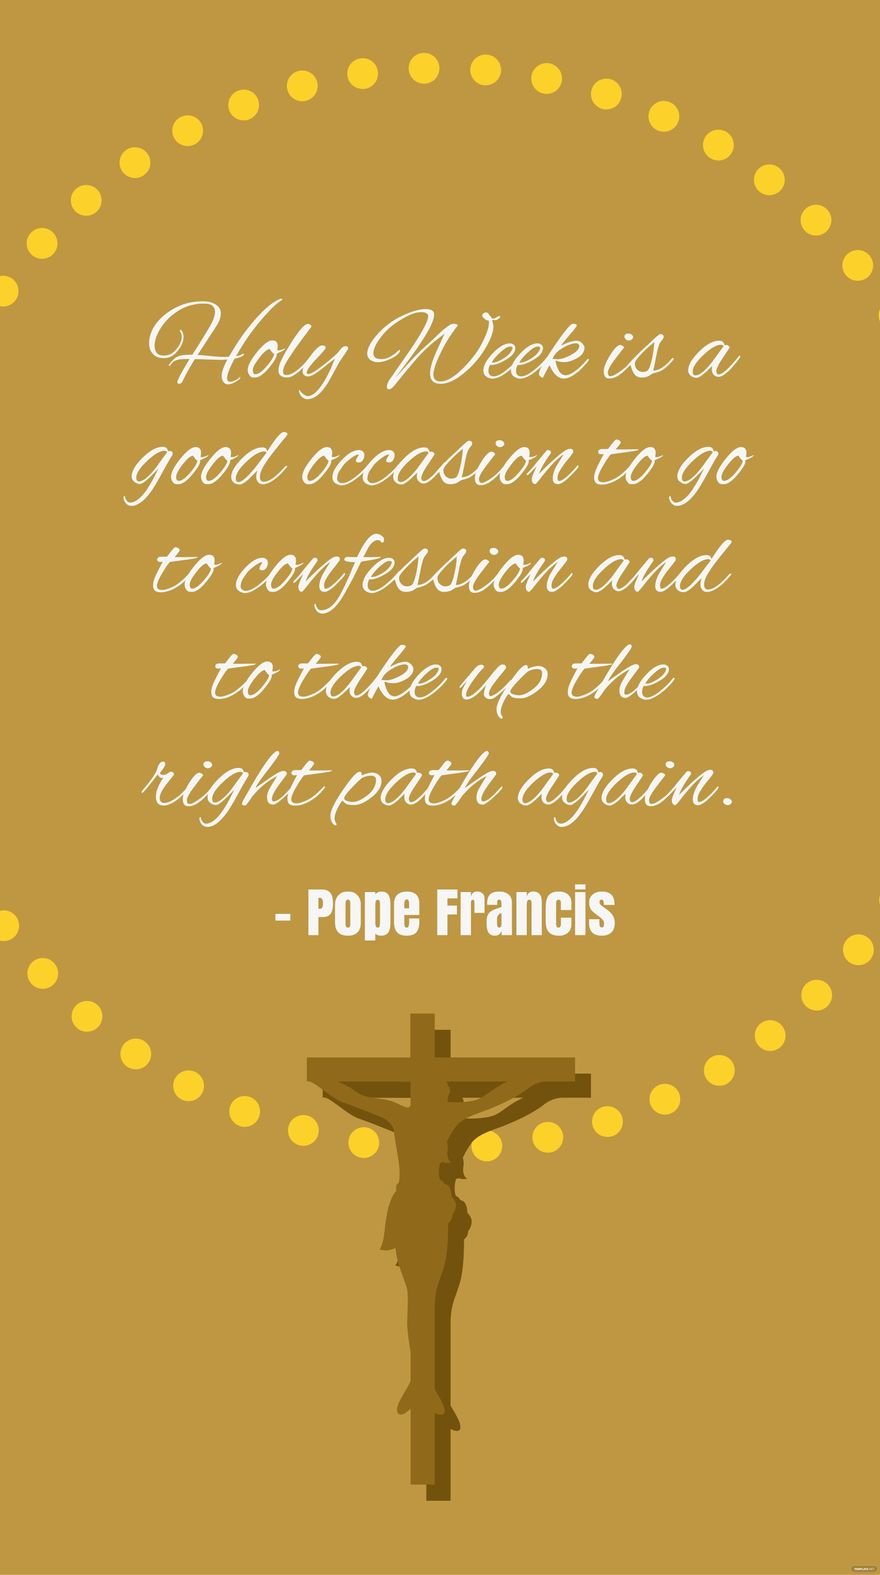 Pope Francis - Holy Week is a good occasion to go to confession and to take up the right path again.